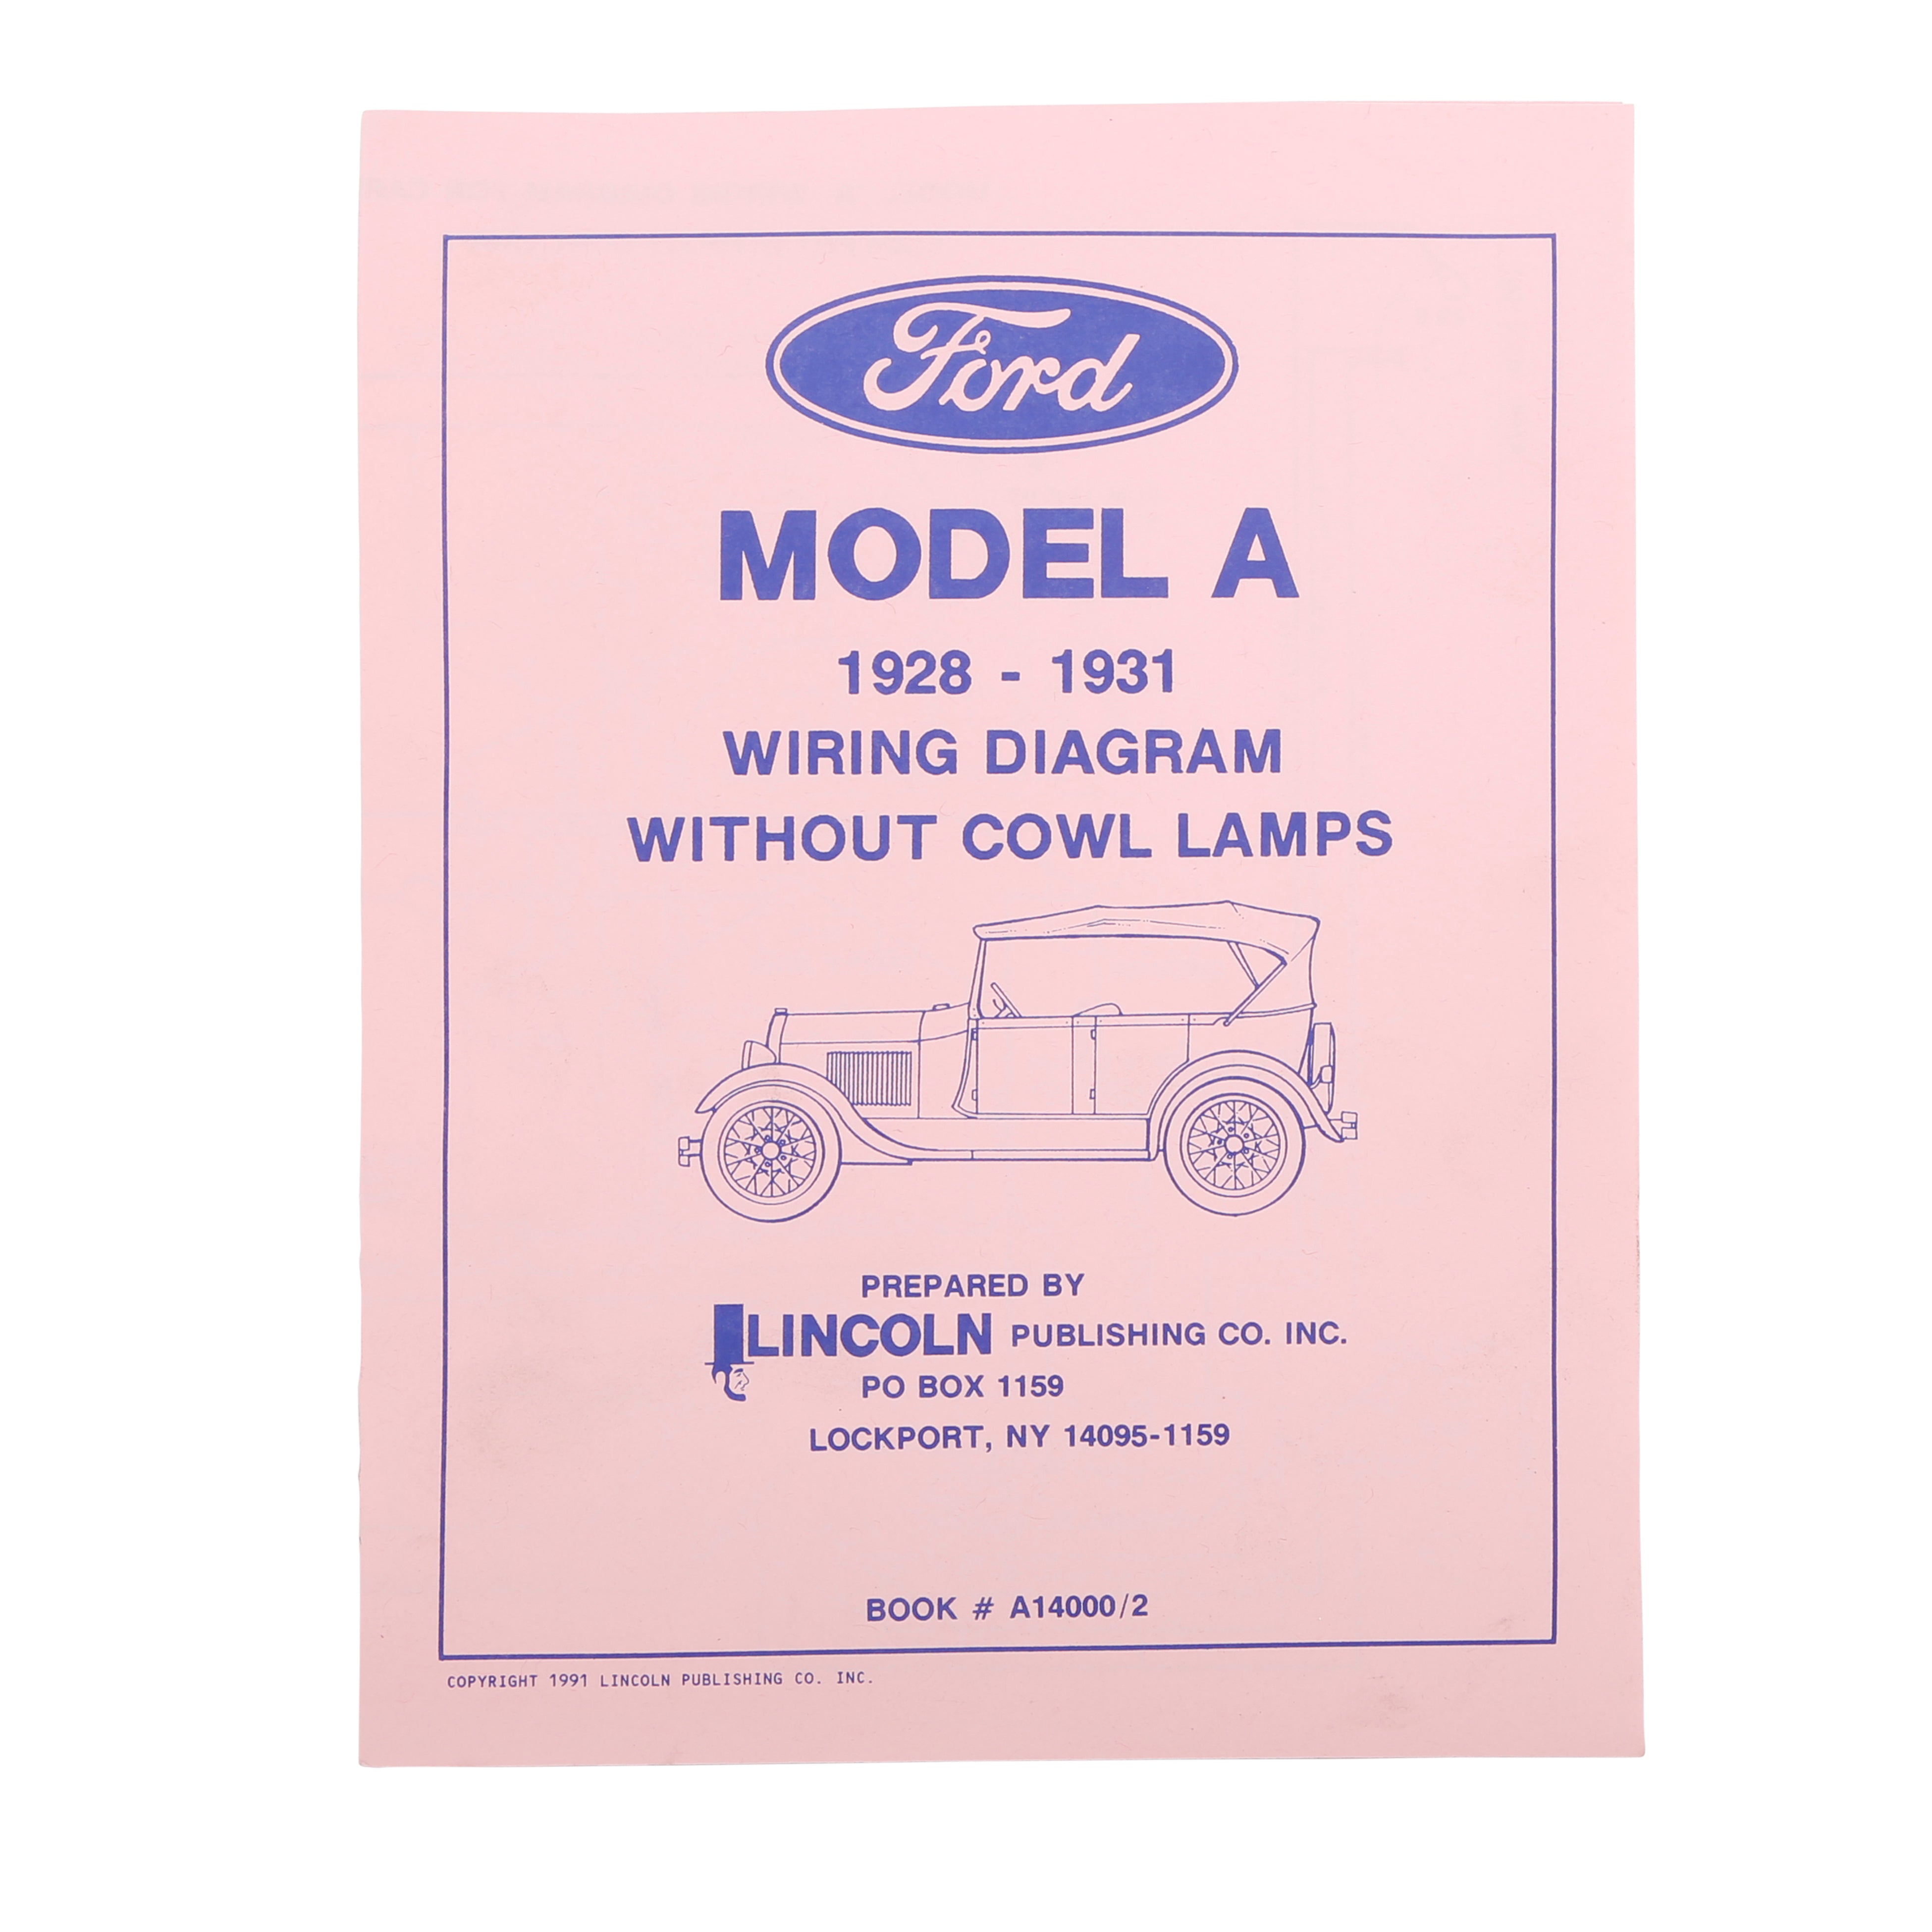 Model A Ford Wiring Diagram without Cowl Lamps